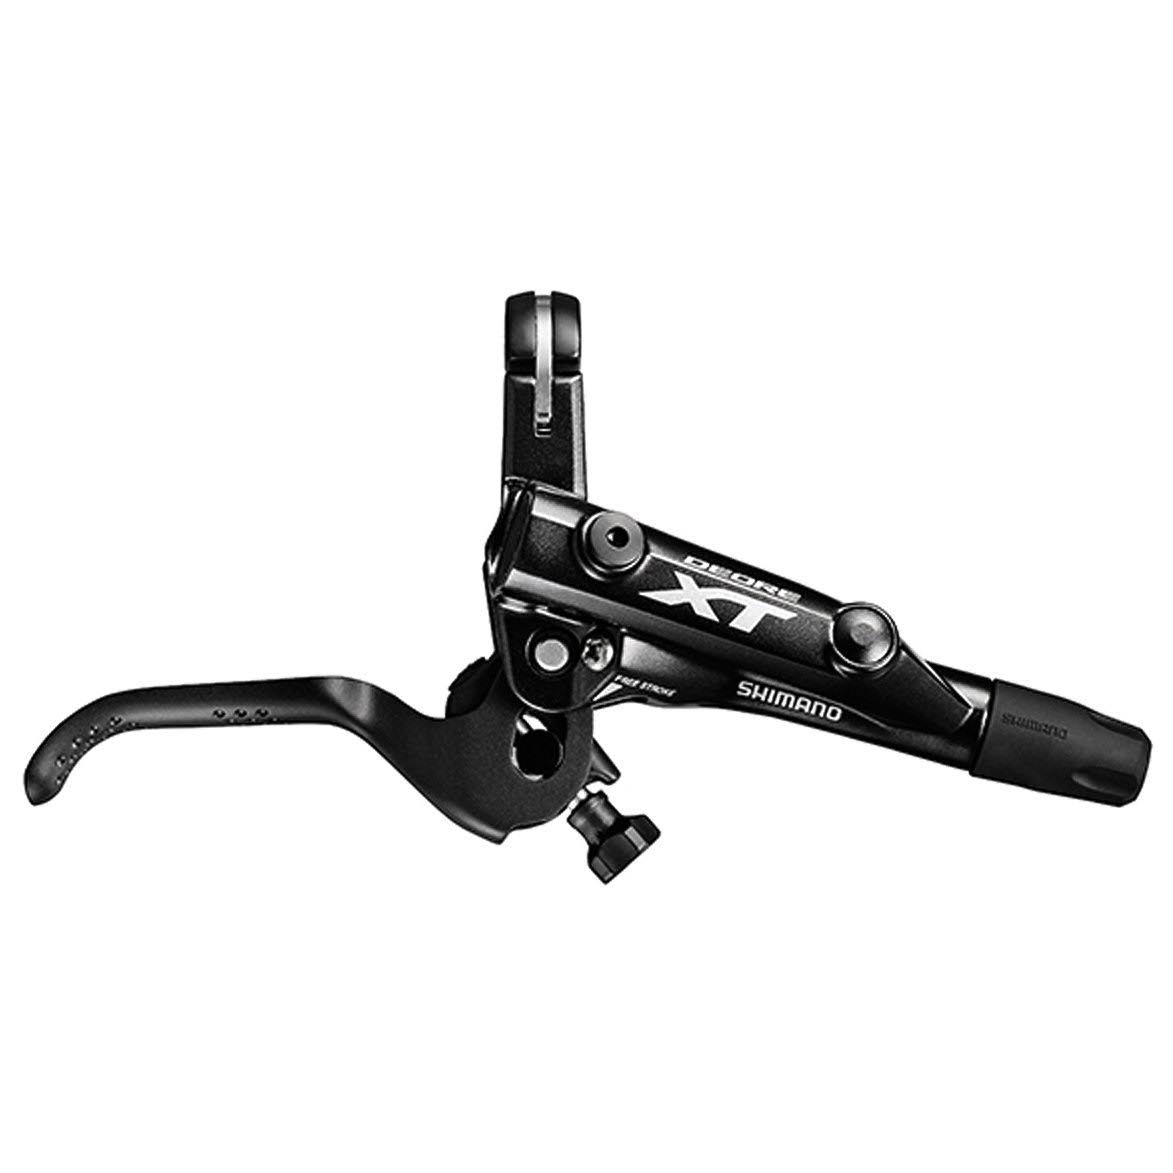 Shimano Deore XT Bicycle Hydraulic Brake Lever